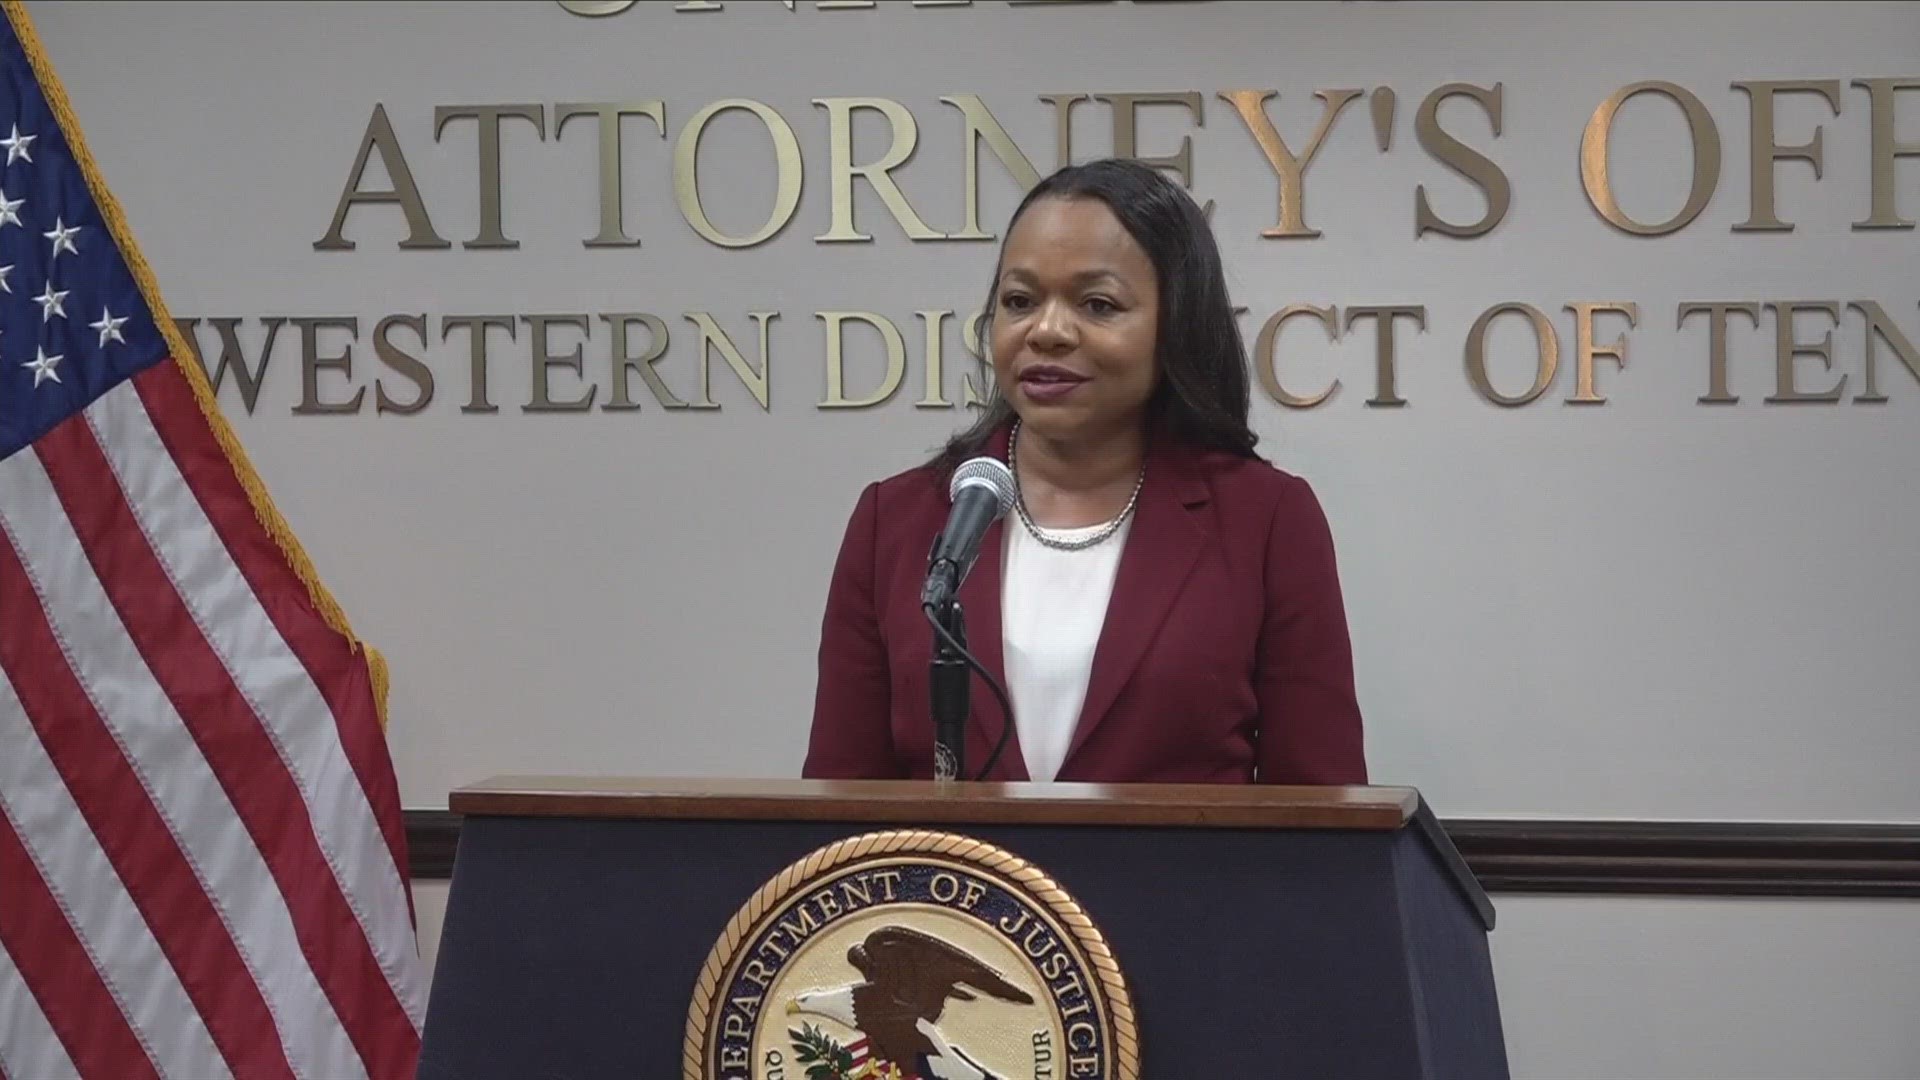 The investigation will look into "patterns of practice" with MPD, looking into use of force, protocols on traffic stops, and unlawful stops and arrests, said the DOJ